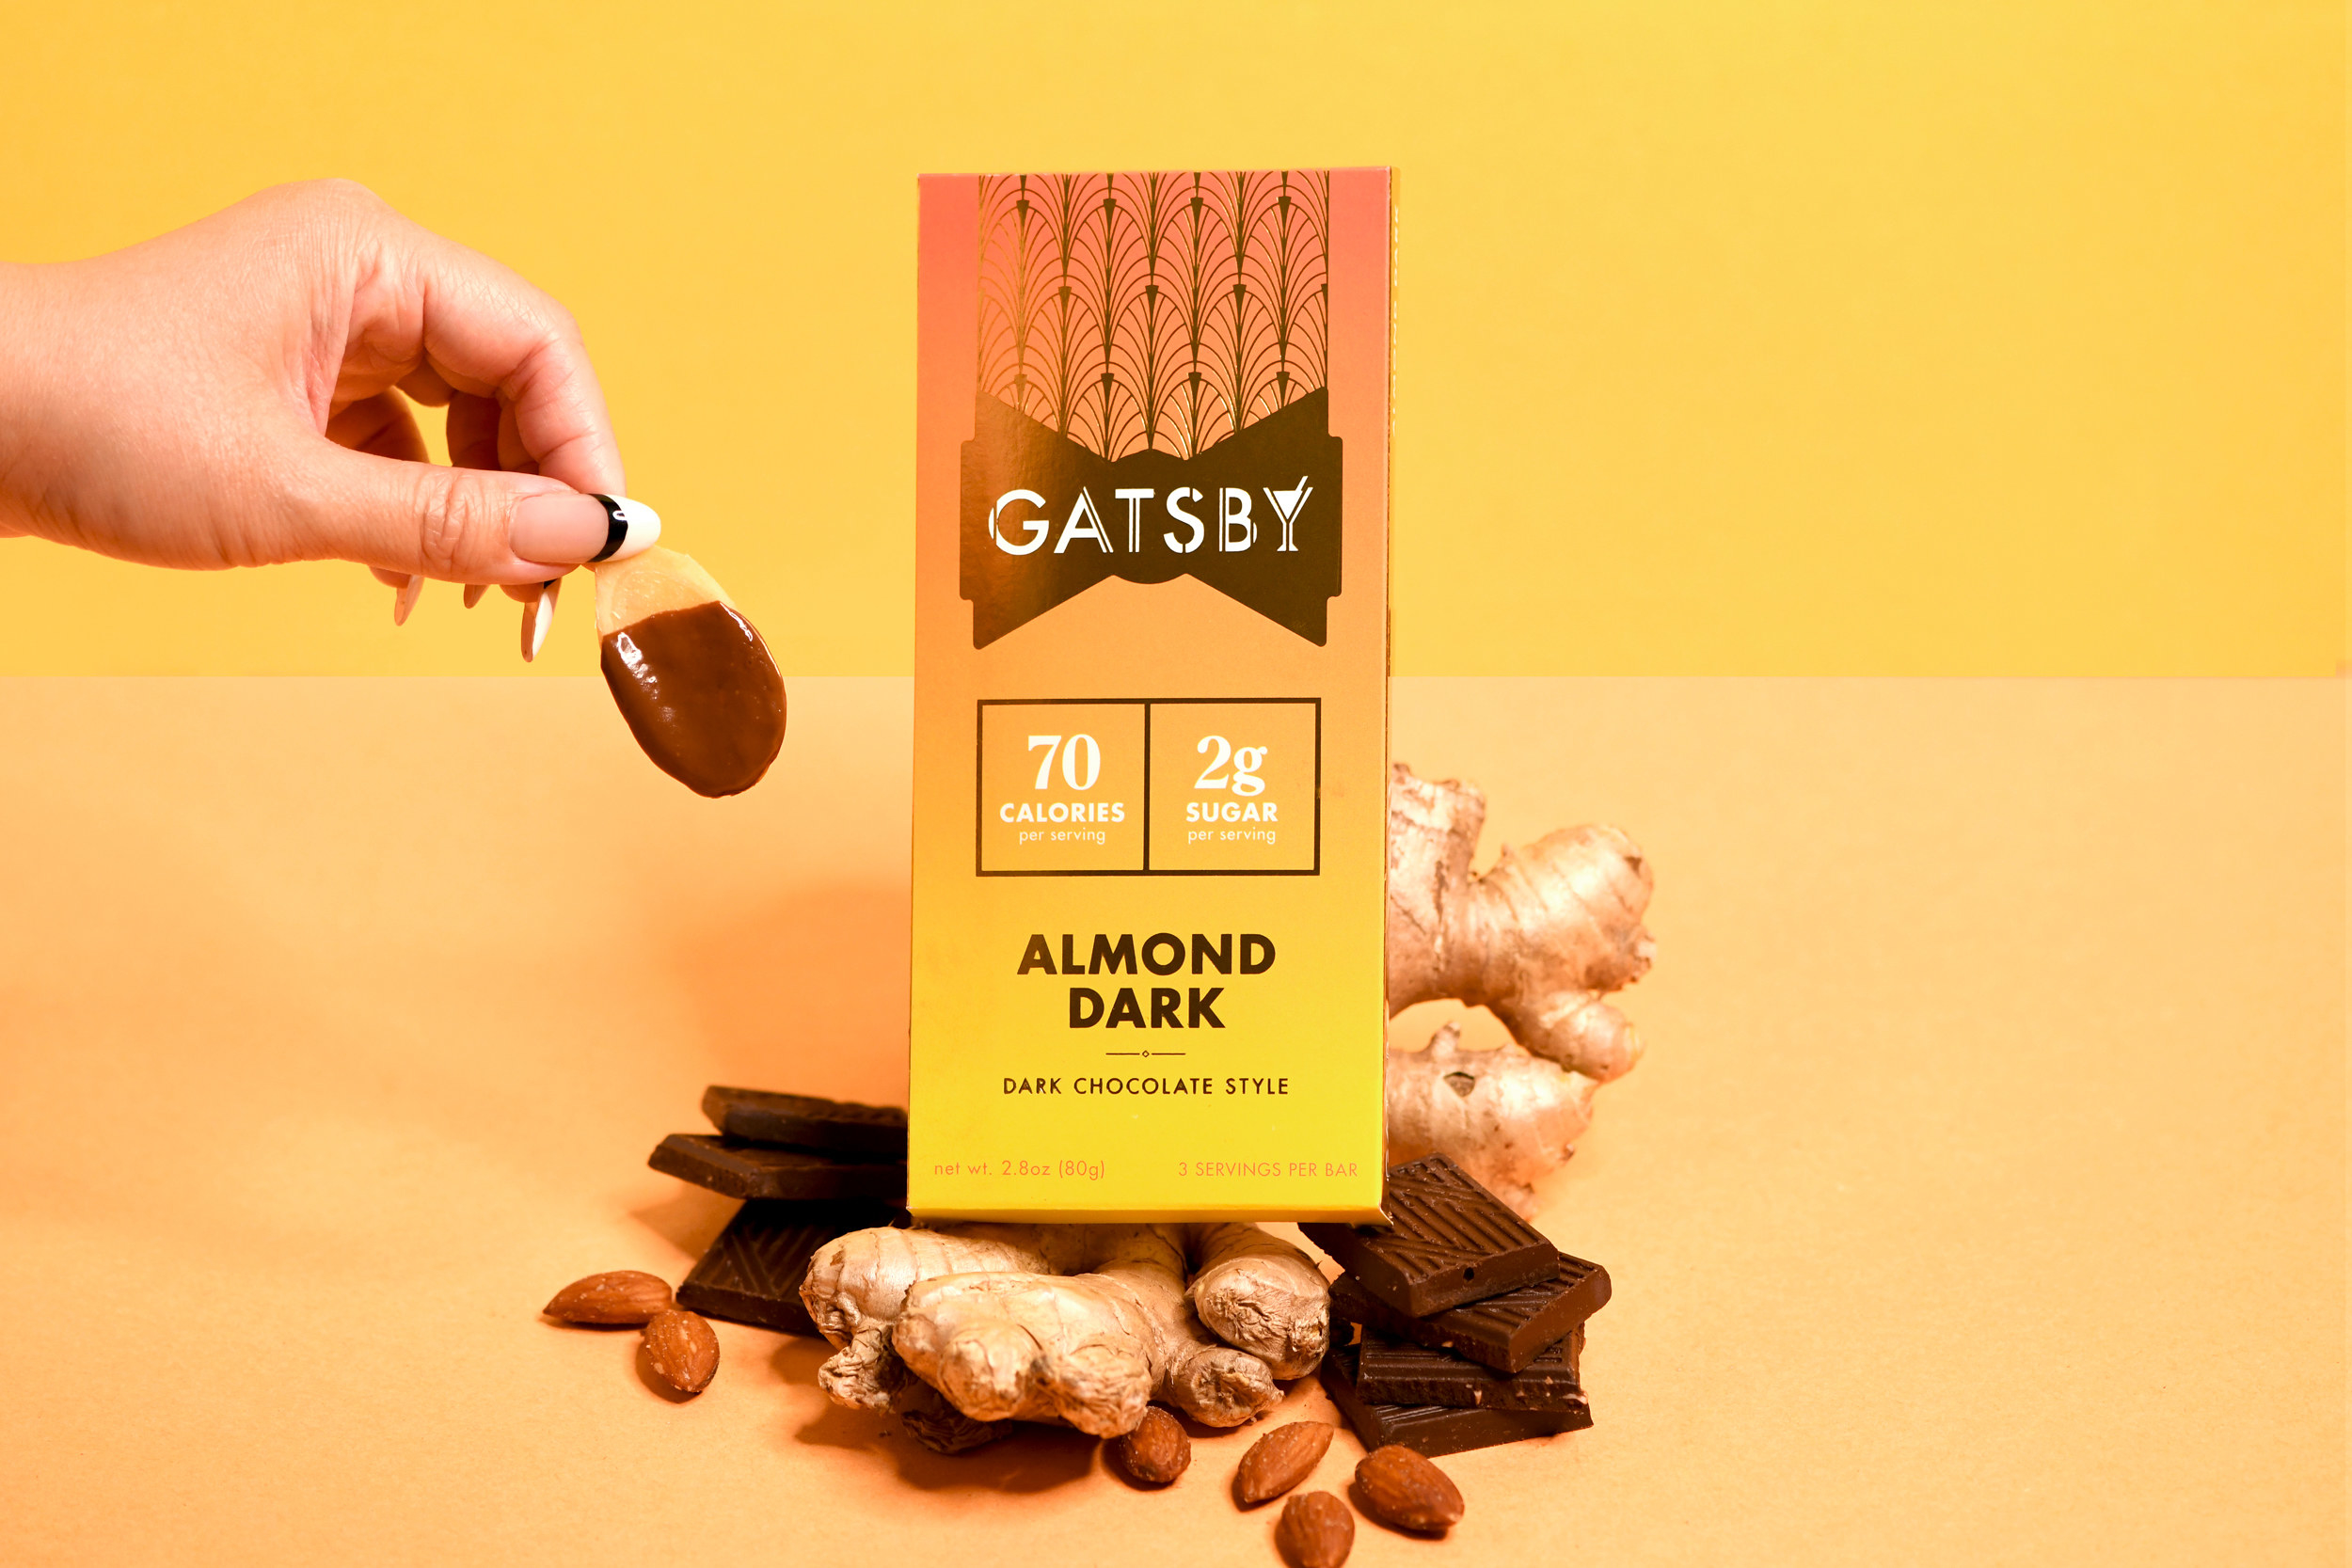 A bar of Gatsby&#x27;s Almond Dark chocolate set on a pile of ginger and chocolate beside a hand holding chocolate dipped ginger